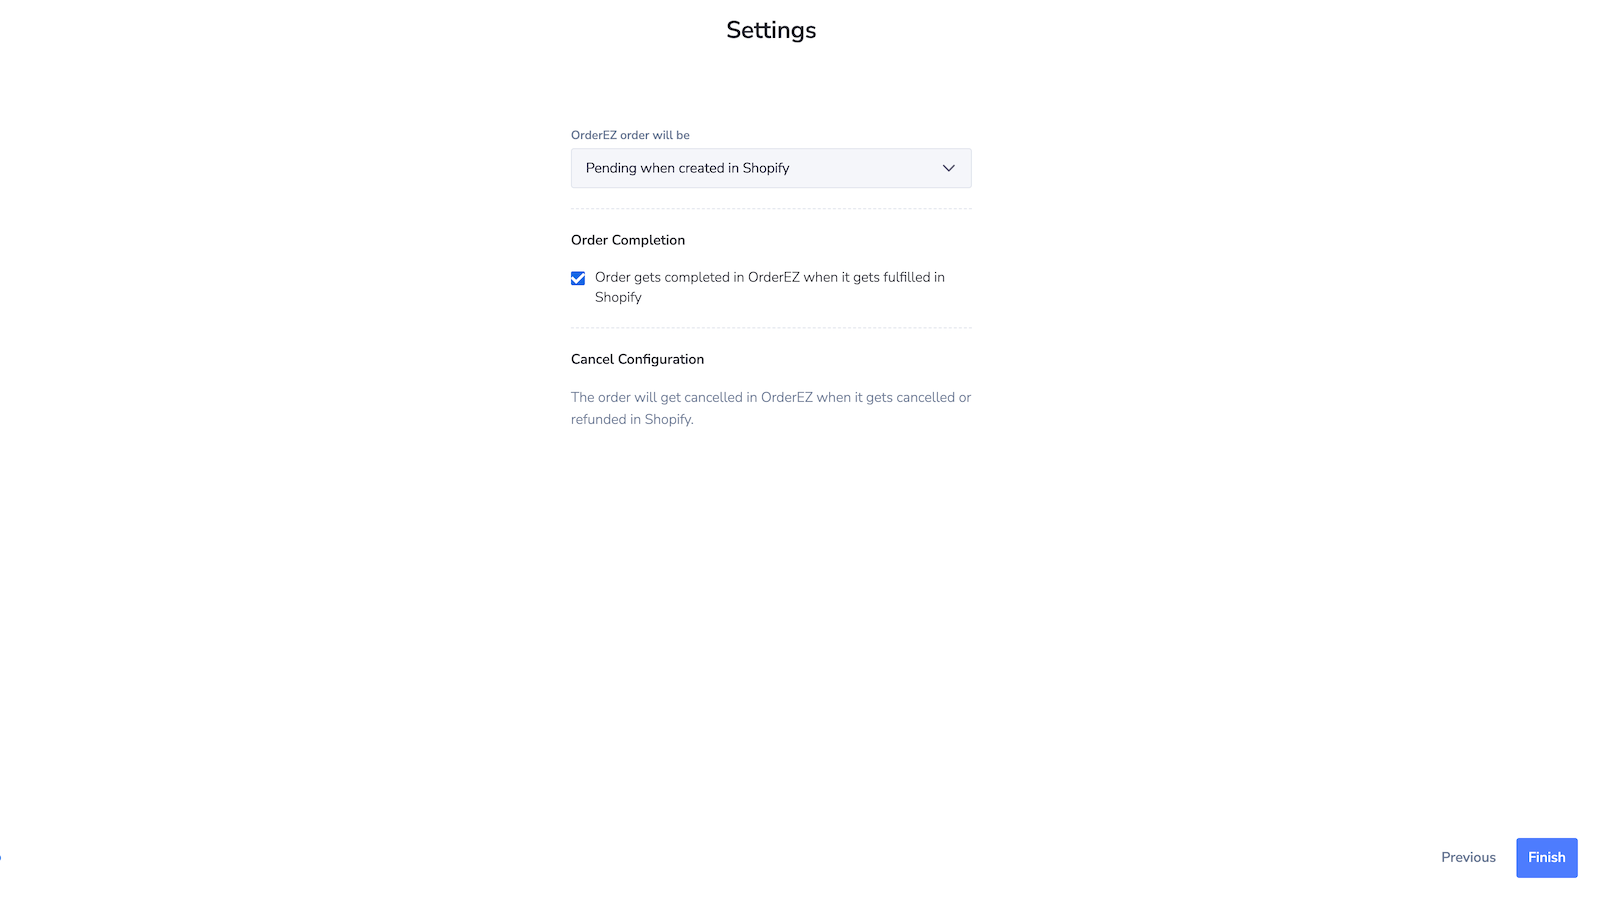 Settings screen for order updates from Shopify to OrderEZ